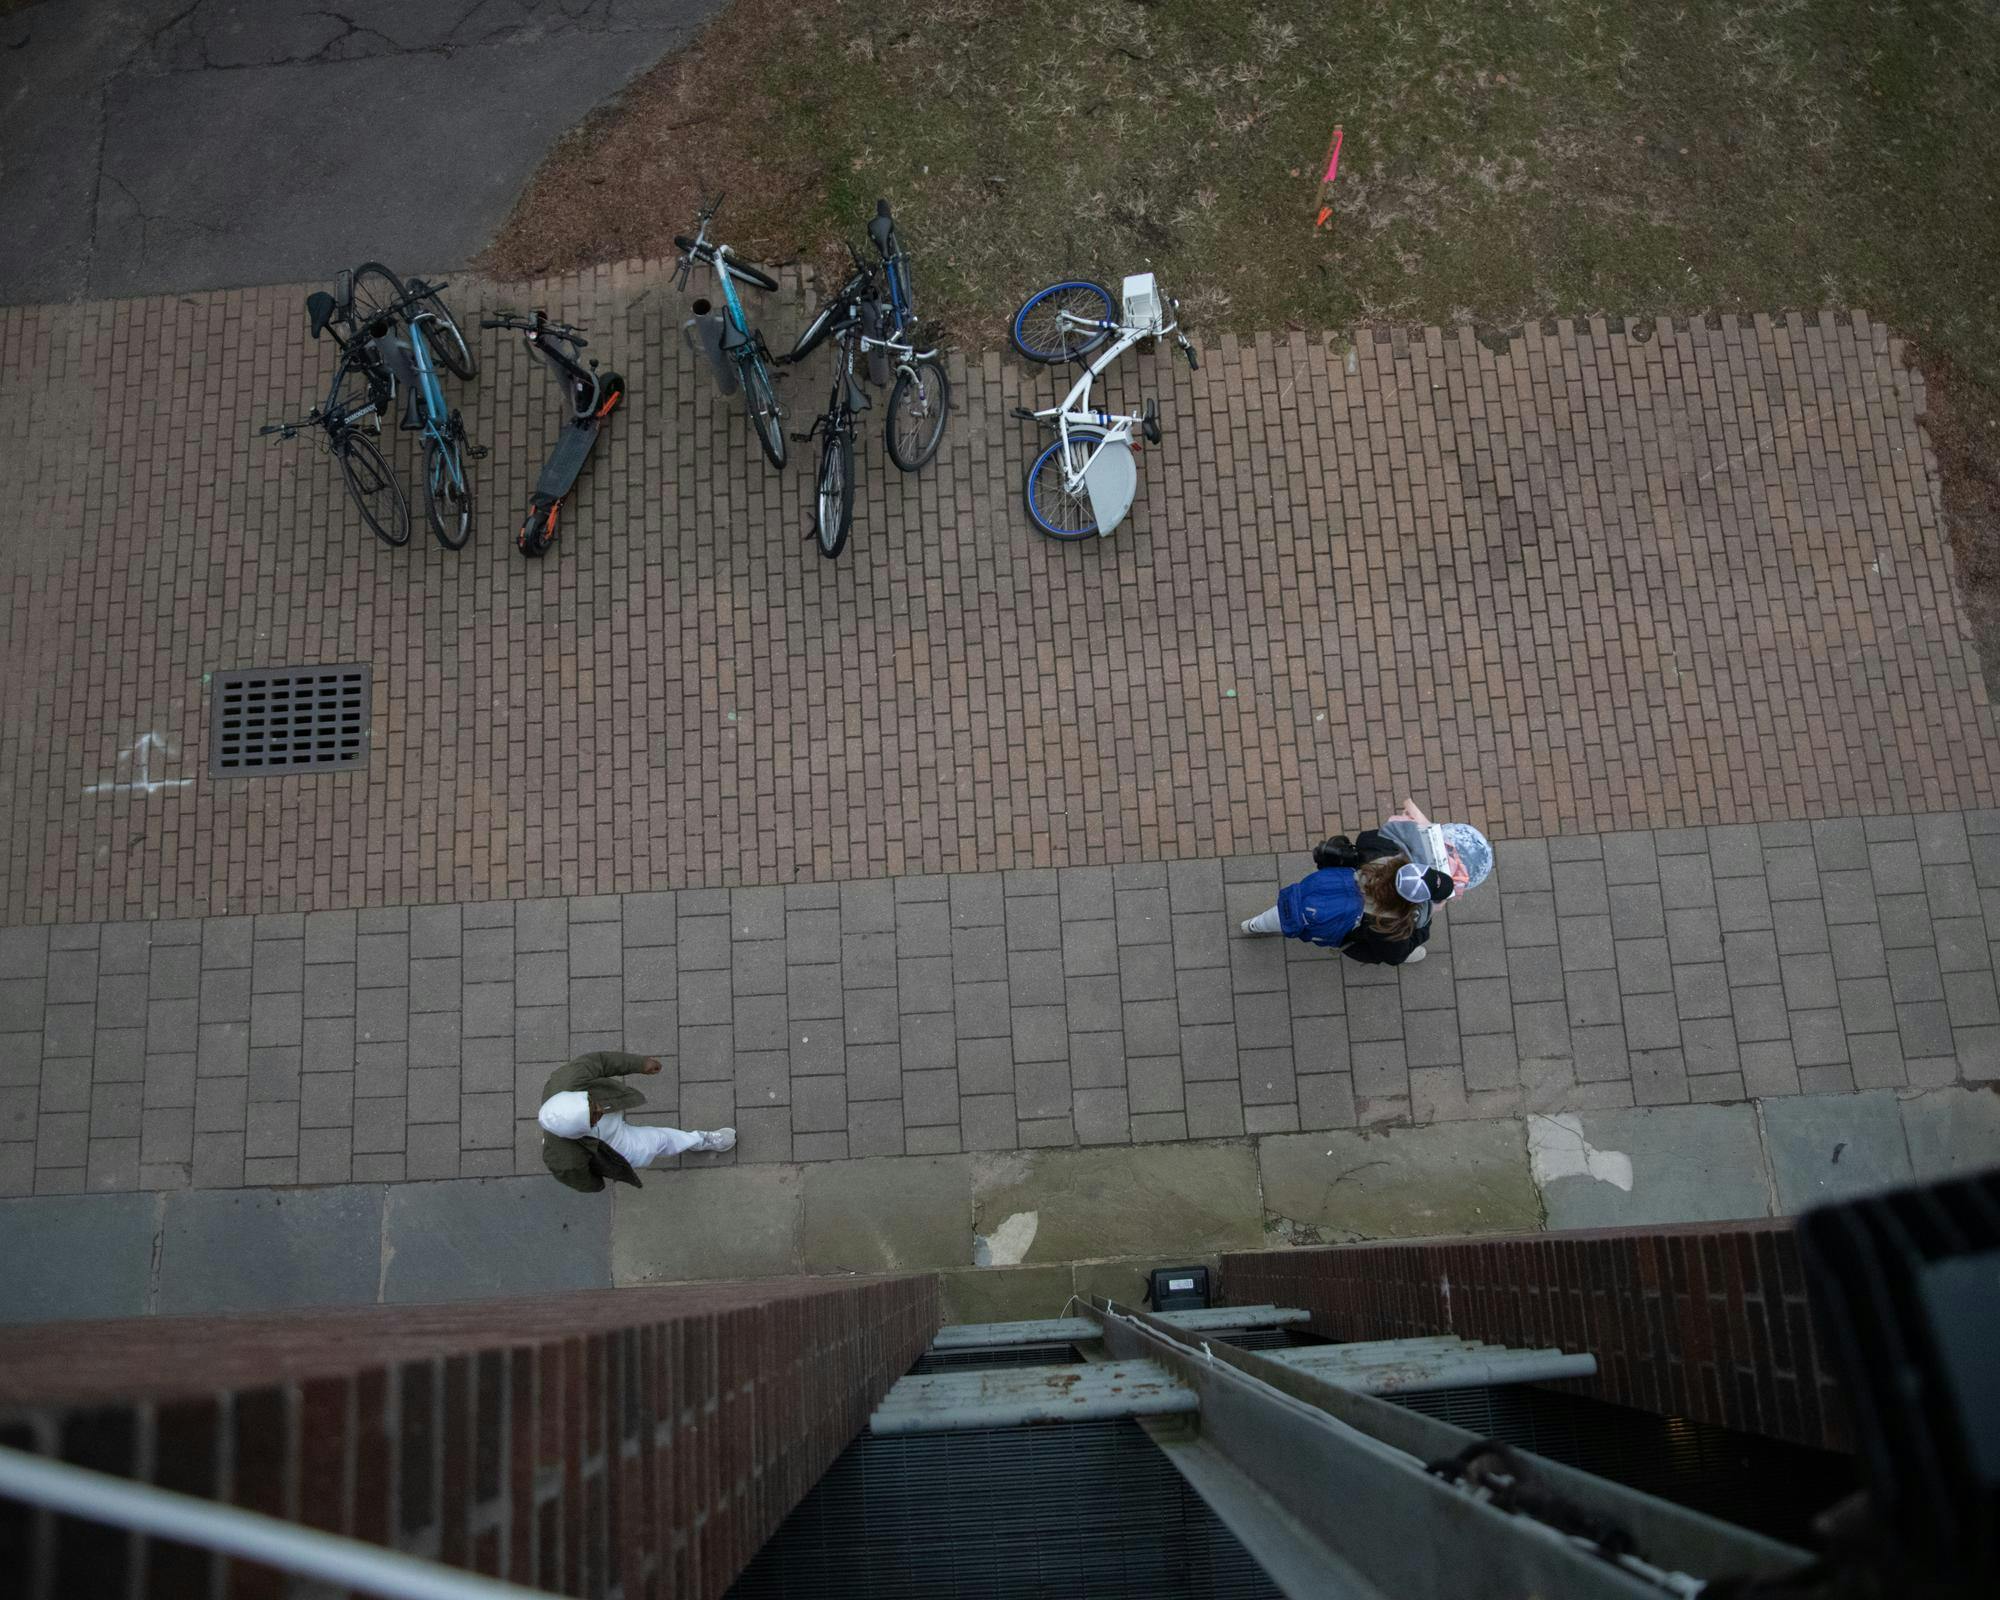 Two students walk on the sidewalk near locked bikes, pictured from directly overhead.